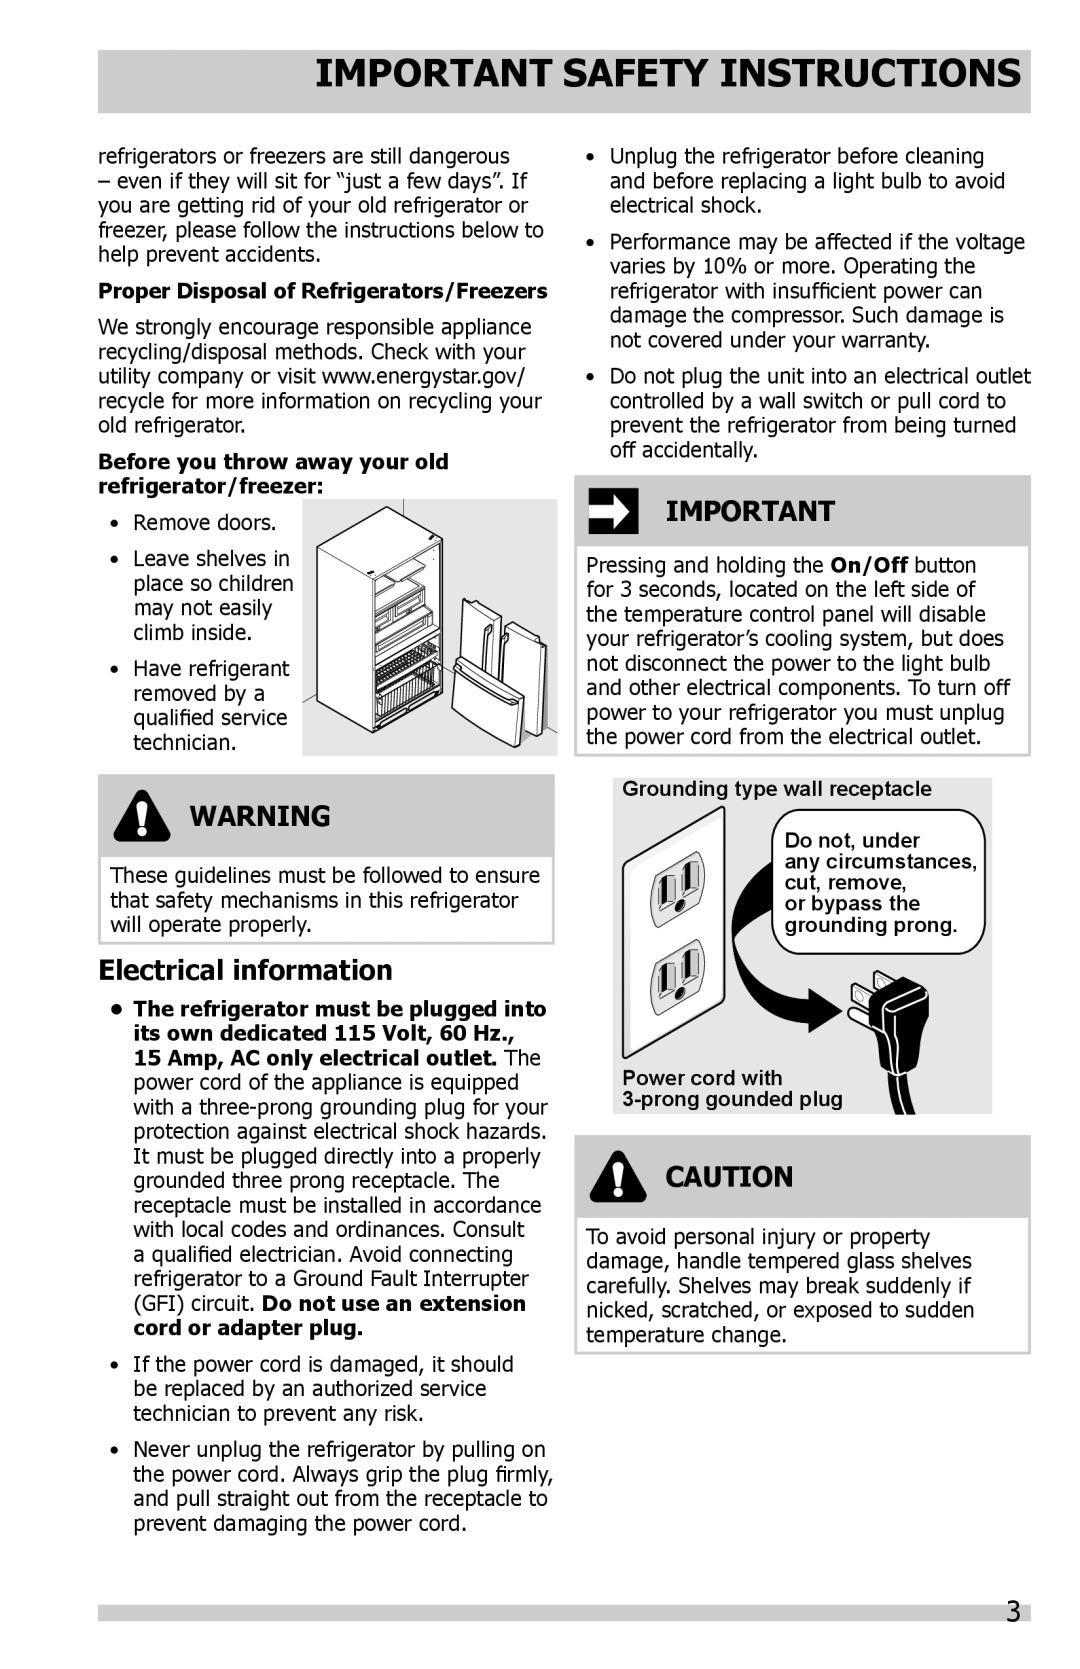 Frigidaire FGUS2632LP Electrical information, Important Safety Instructions, Proper Disposal of Refrigerators/Freezers 